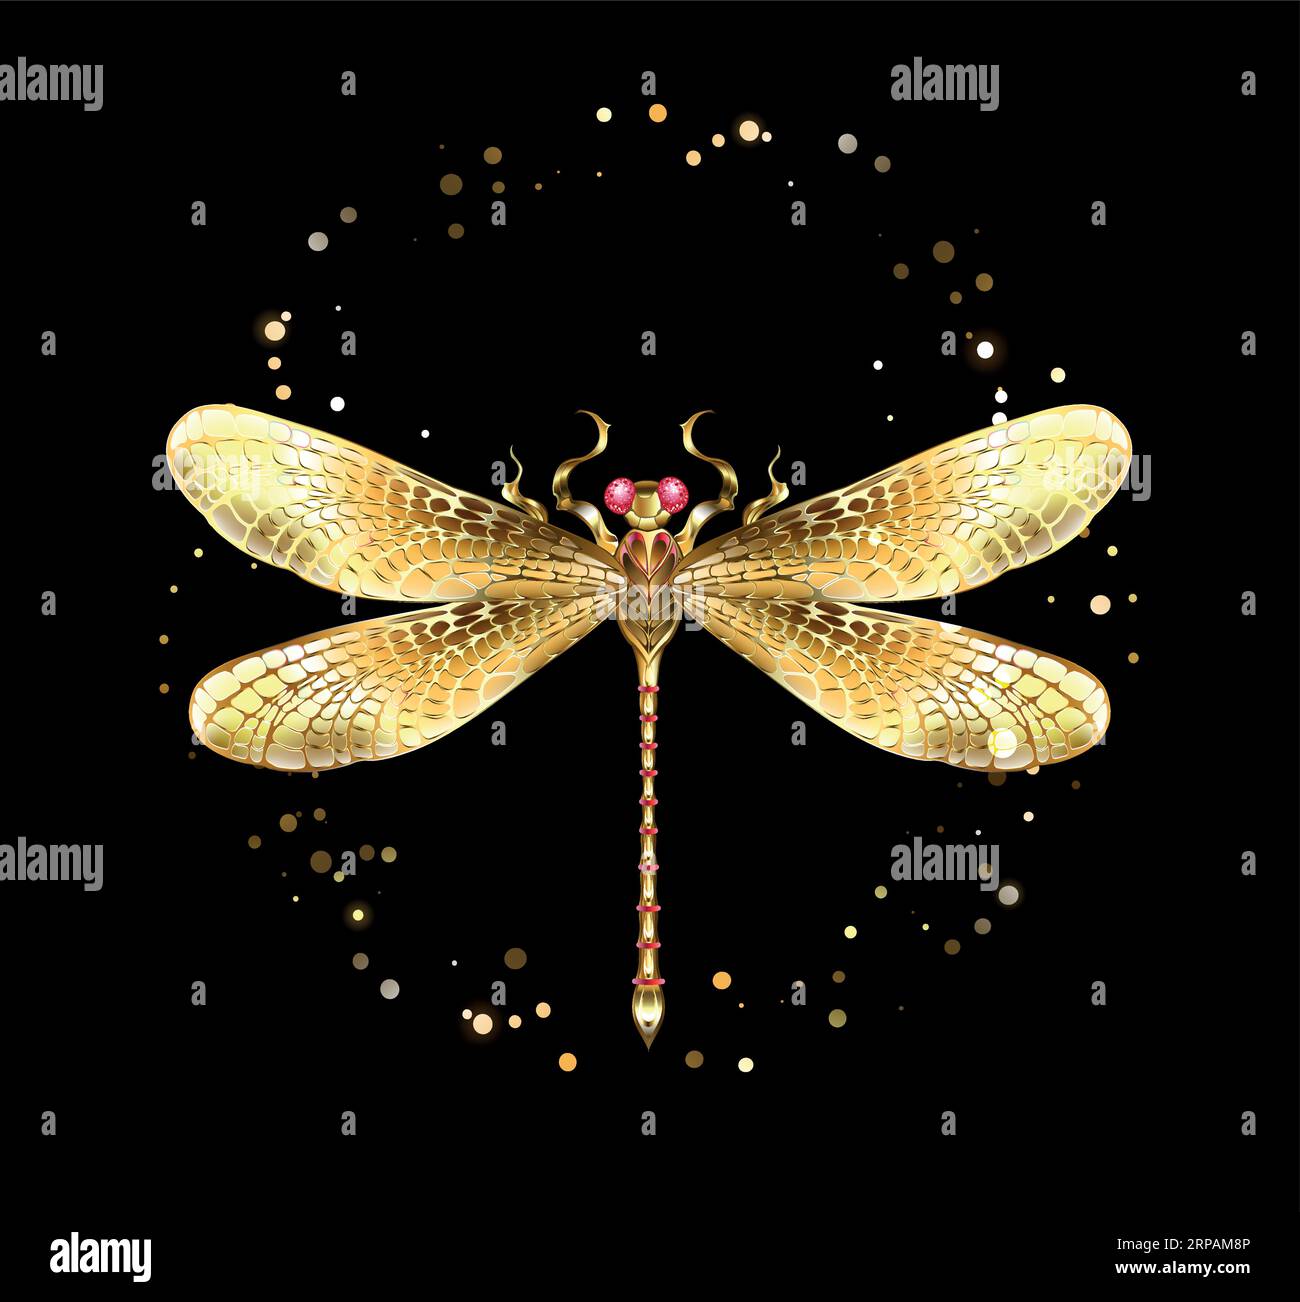 Golden, artistically drawn sparkling, symmetrical dragonfly with shiny, jeweled wings on black background. Stock Vector